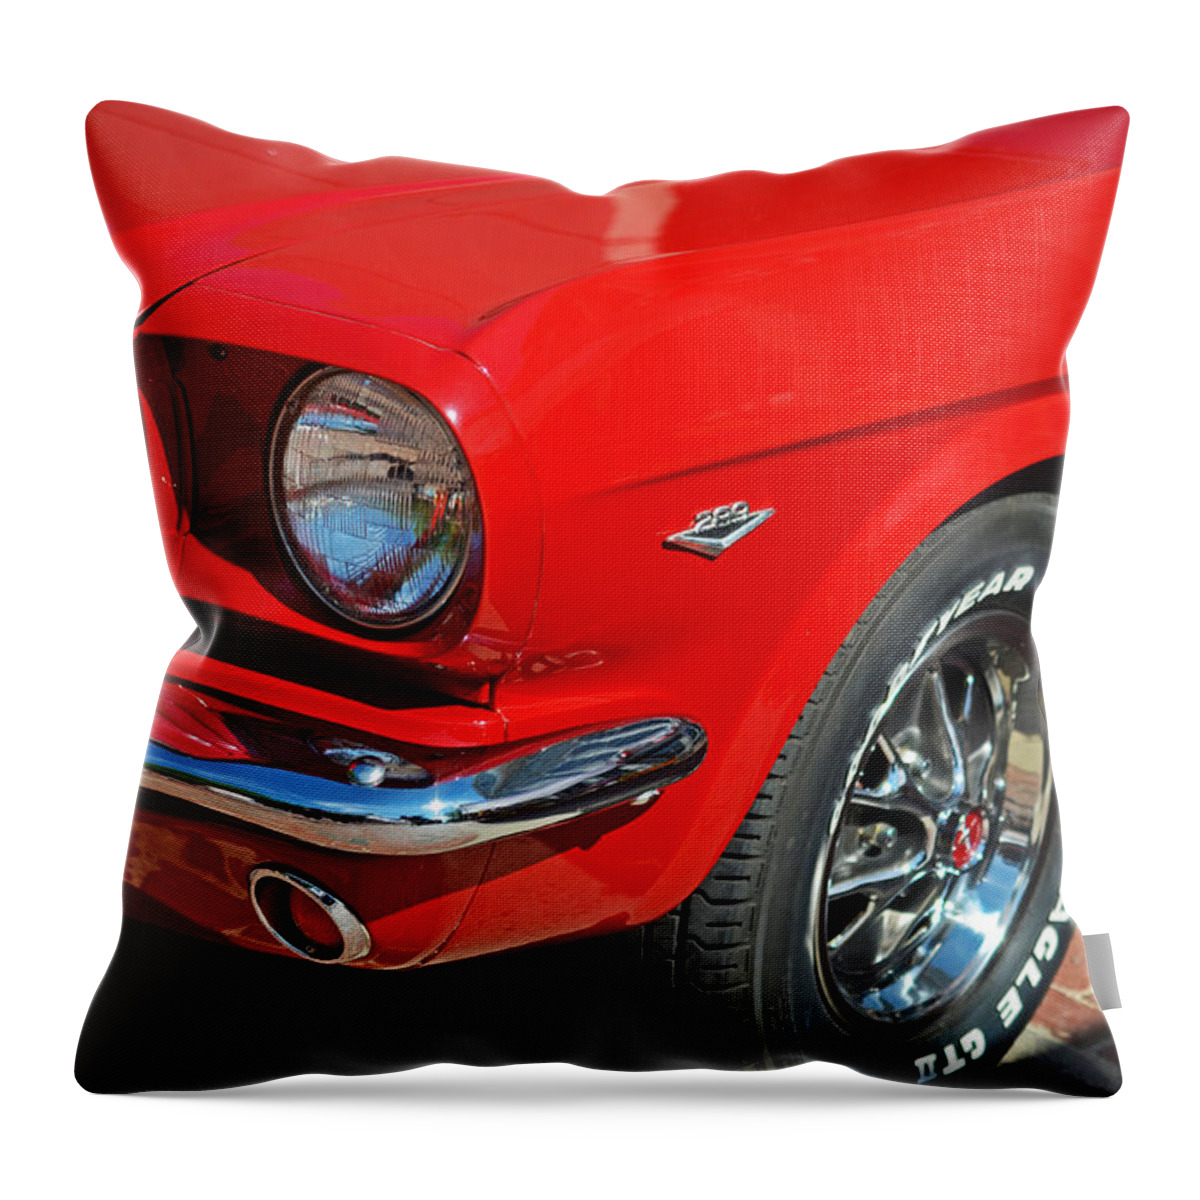 1965 Throw Pillow featuring the photograph 1965 Red Ford Mustang Classic Car by Toby McGuire